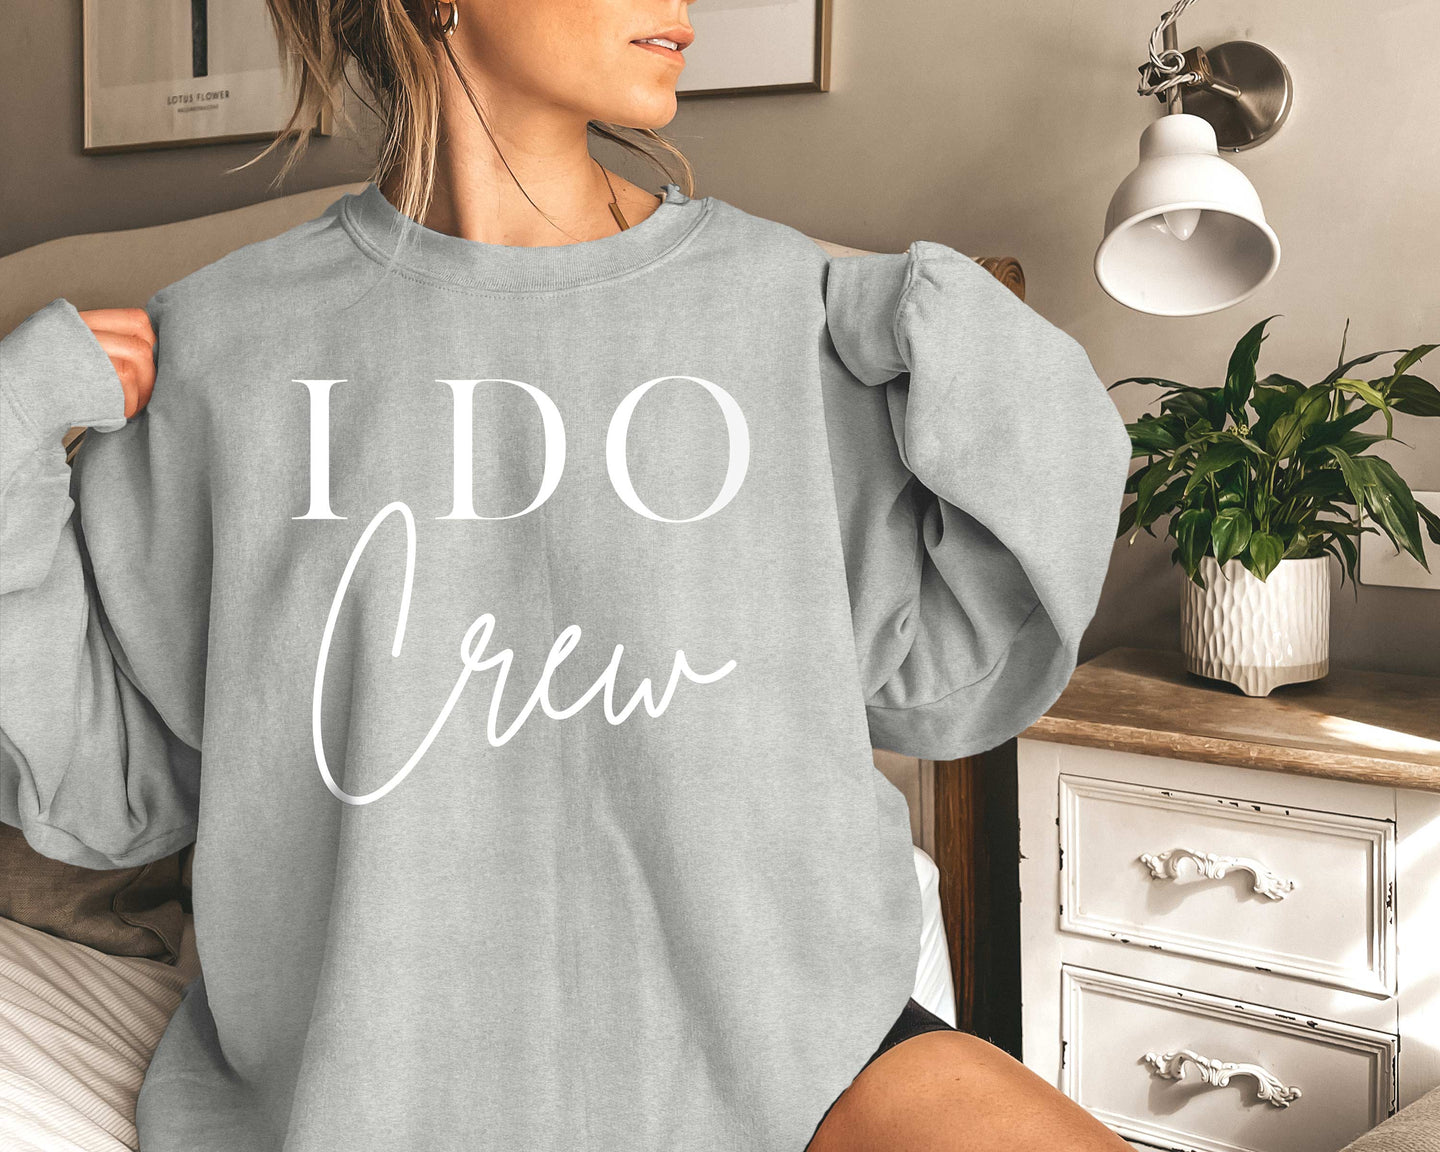 I Do Crew Sweatshirt For Your Bachelorette Party - More Colors